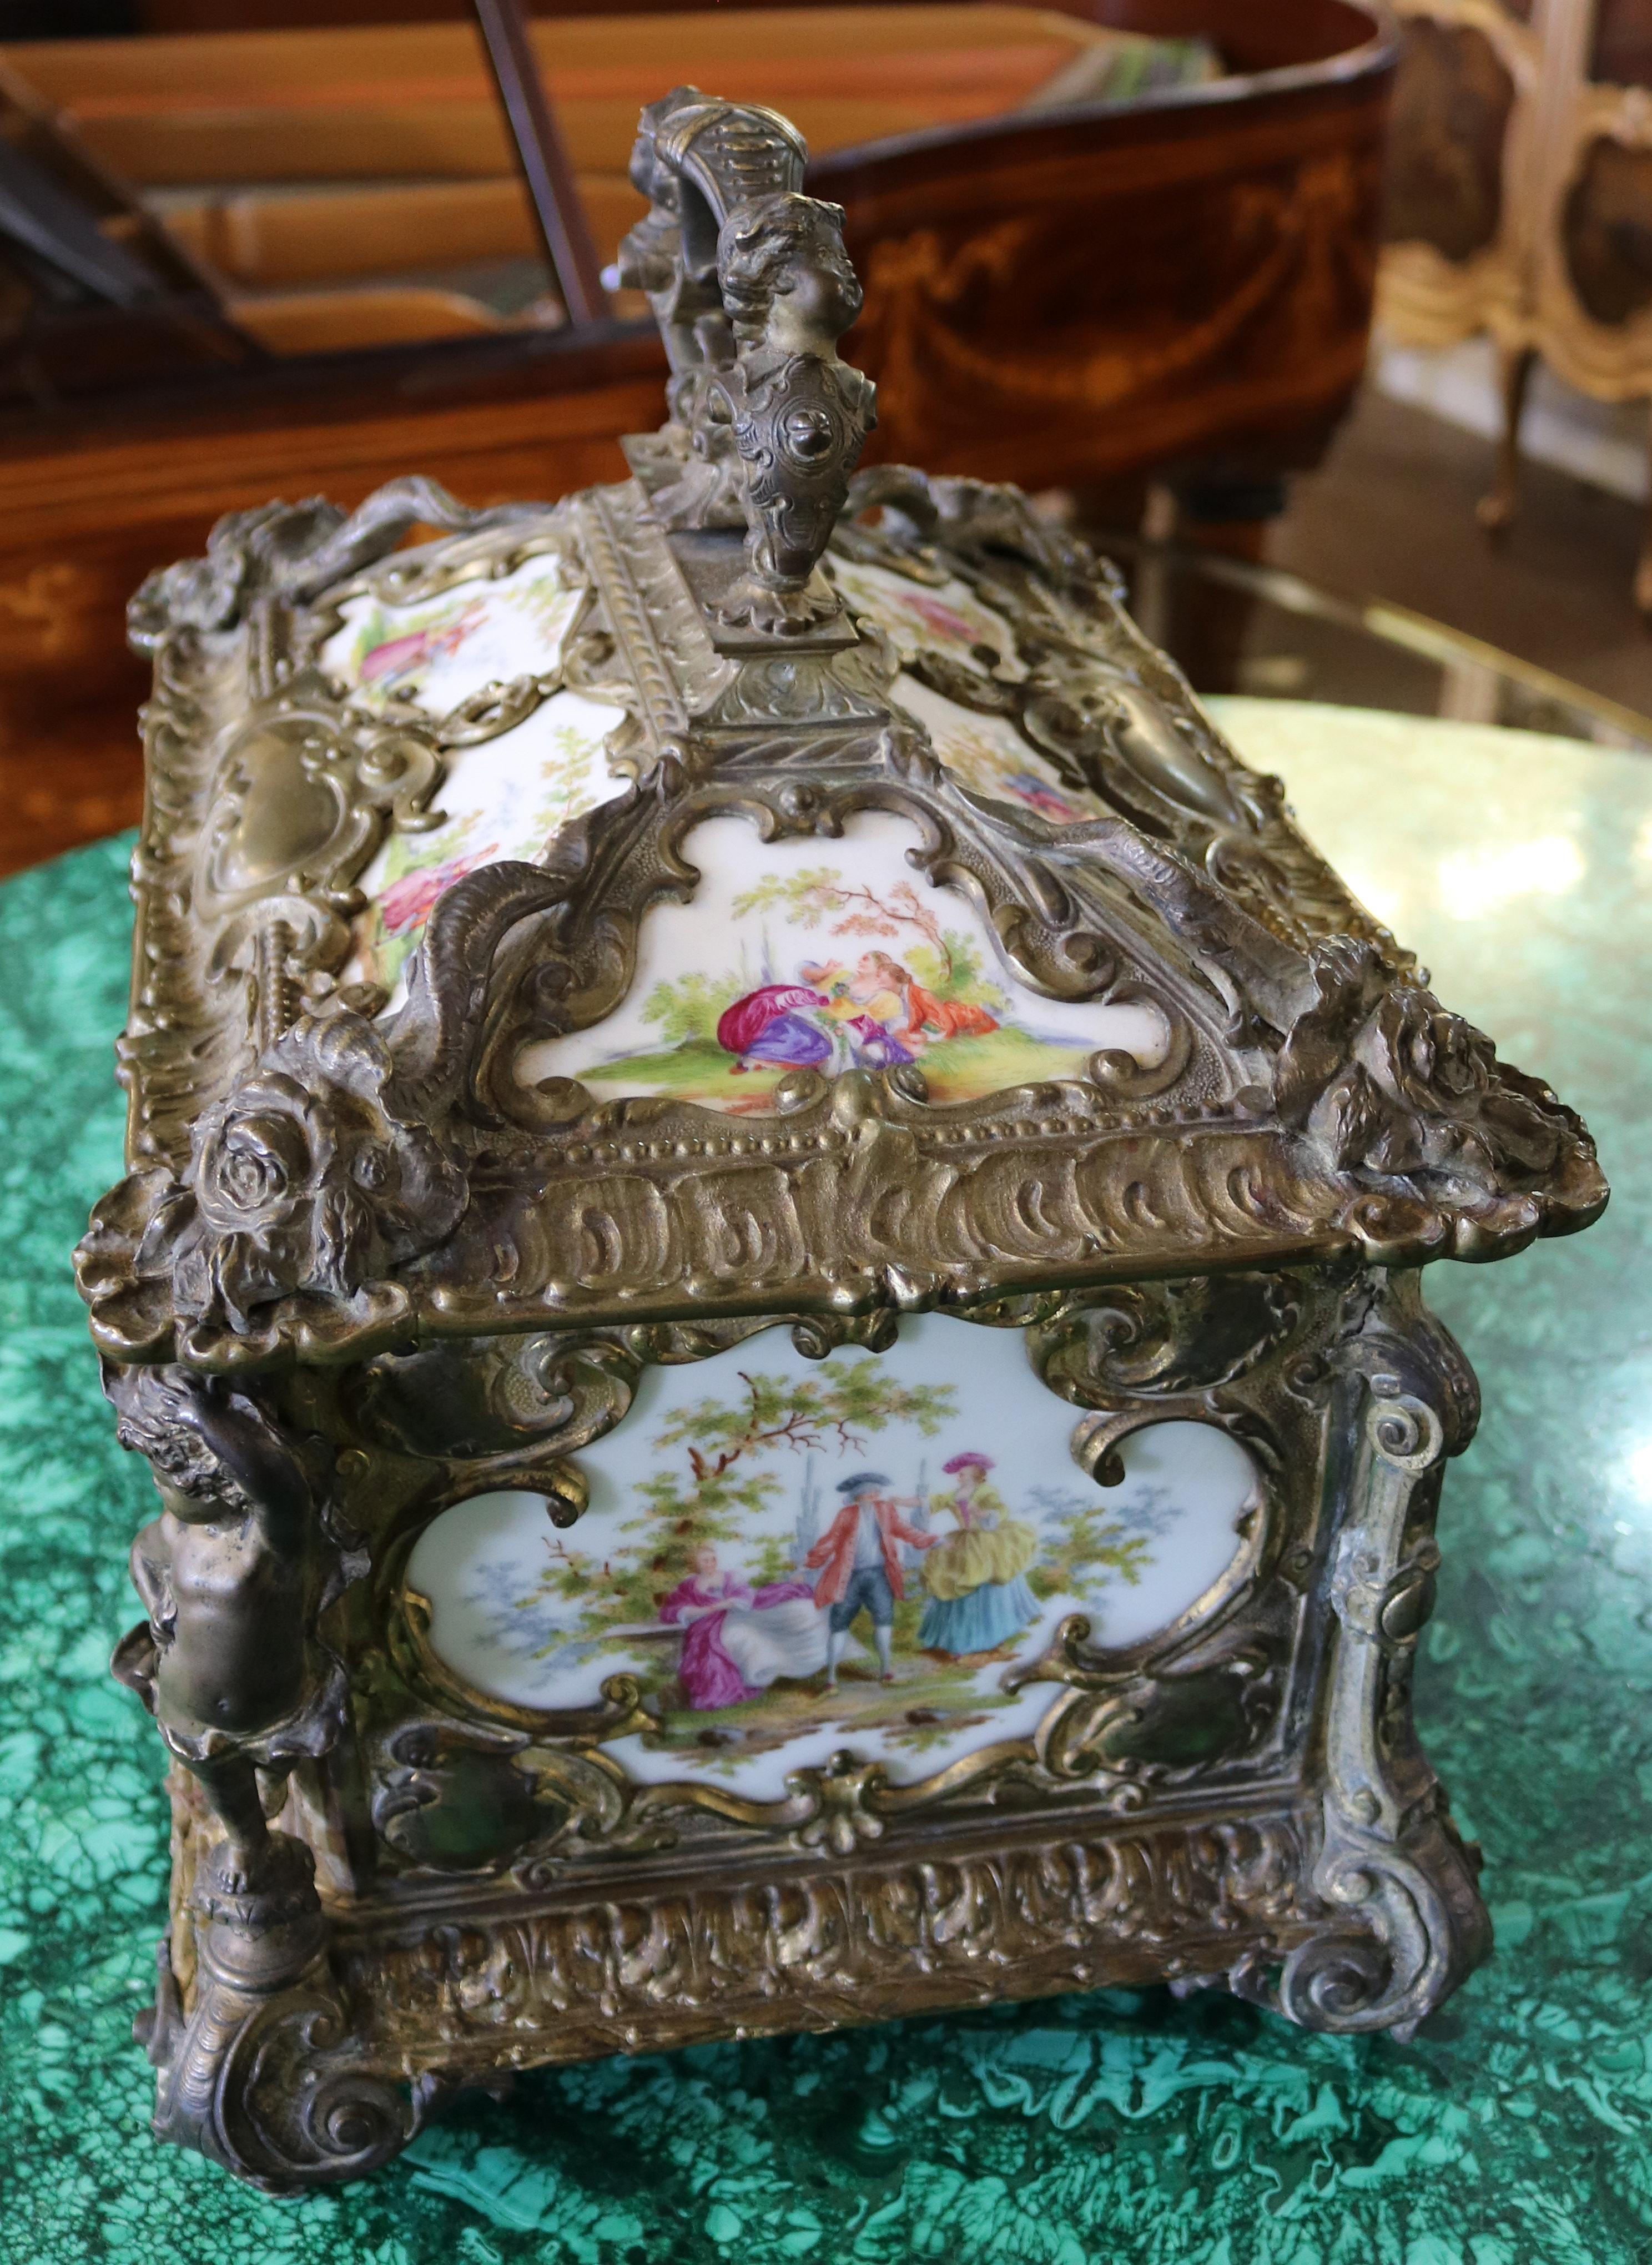 Outstanding Large 19th Century Bronze & Porcelain Jewelry Casket Box In Good Condition For Sale In Long Branch, NJ